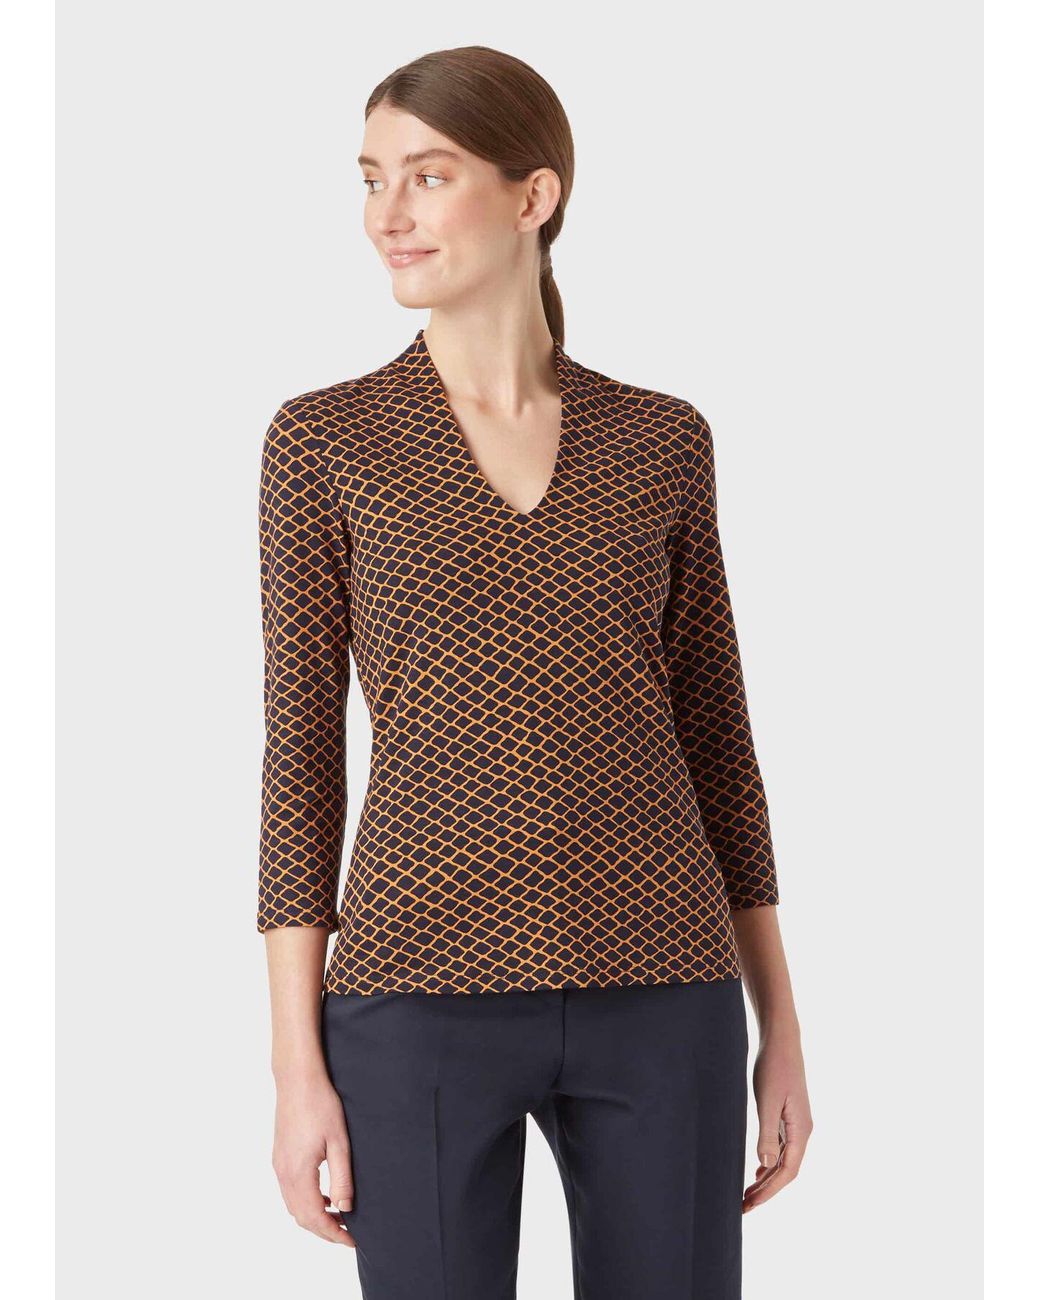 Hobbs Synthetic Aimee Printed V Neck Top in Navy Marigold (Brown) - Lyst